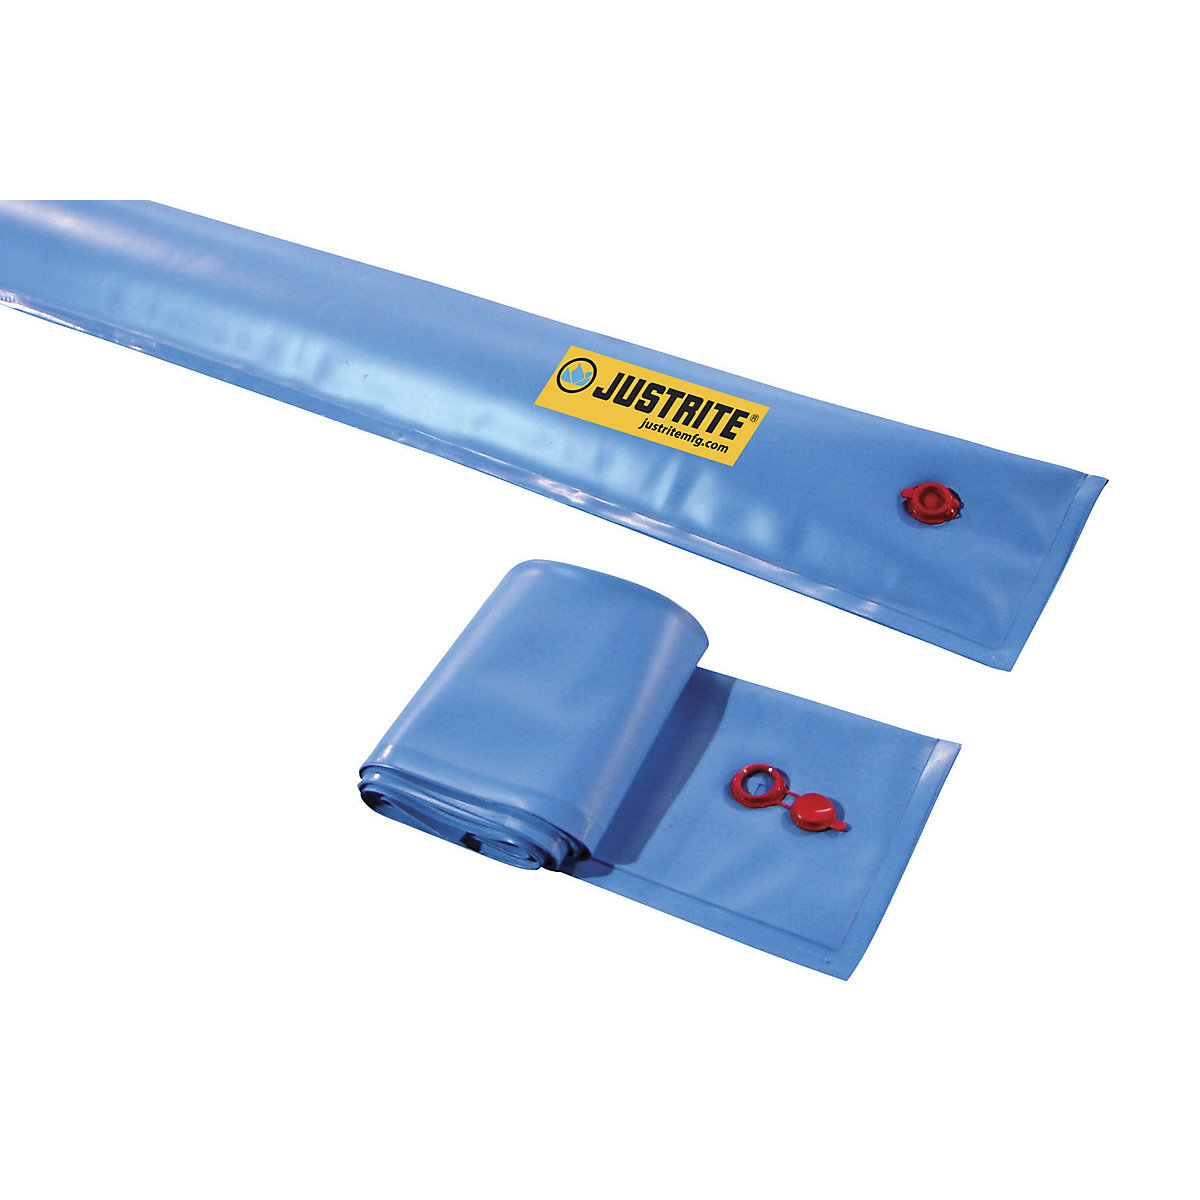 Barrier roll for filling with water – Justrite